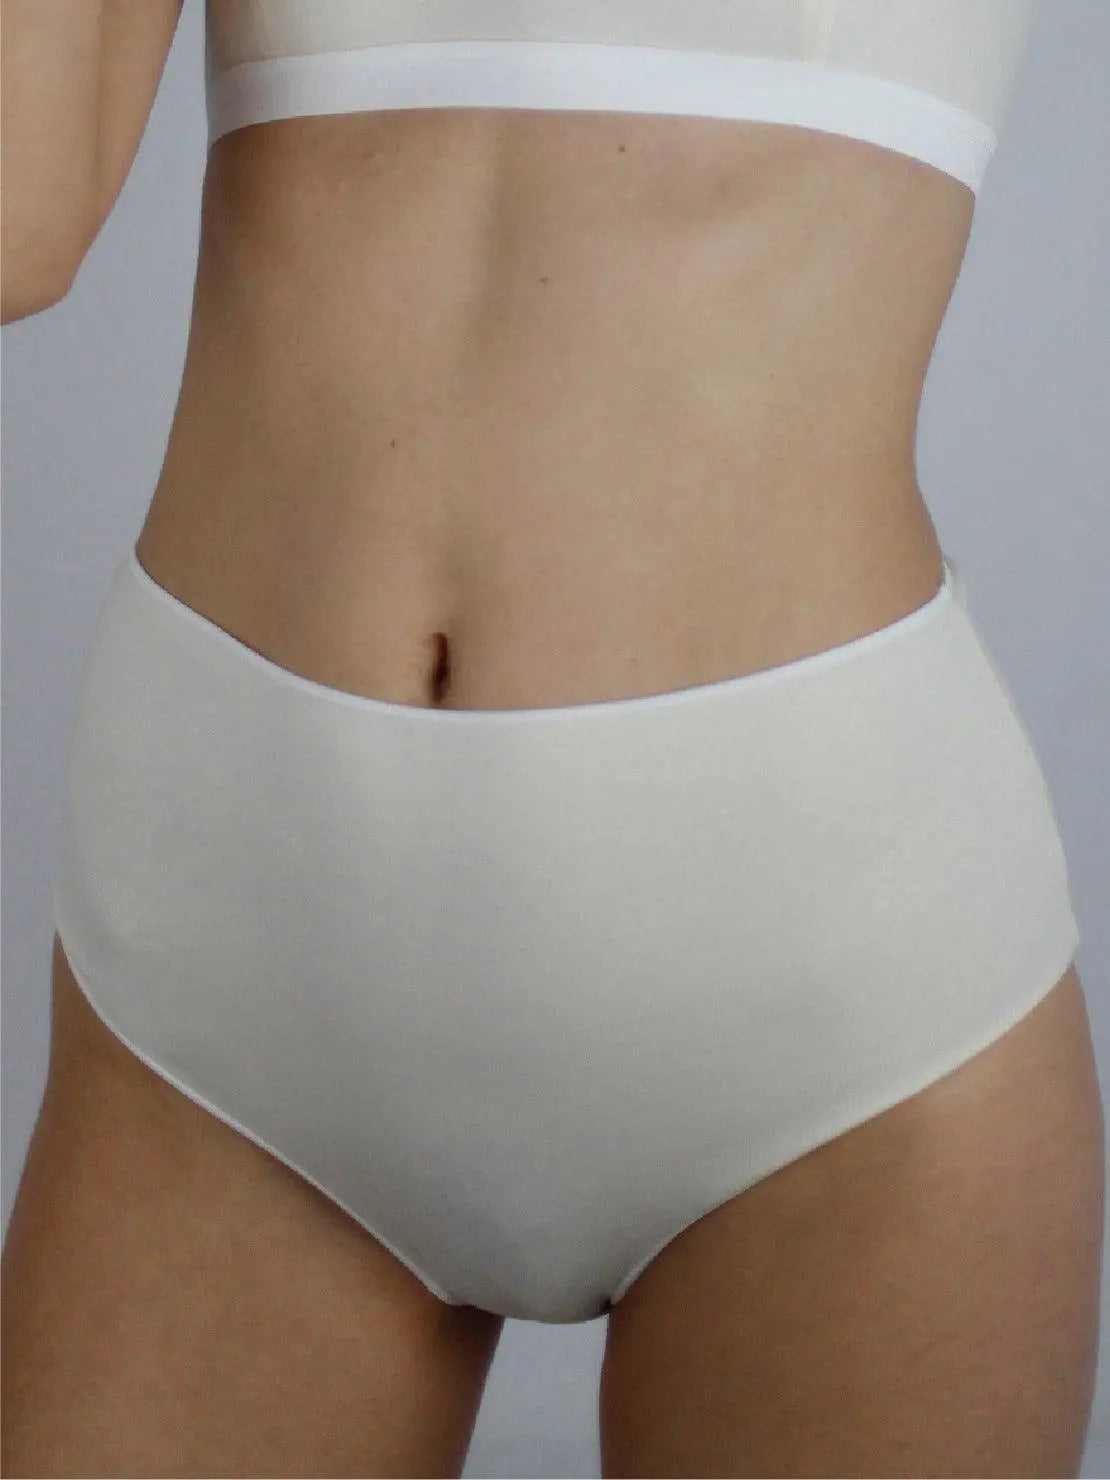 A person is shown from the torso down wearing Ecru Basic Highwaist Organic Cotton Briefs - Talk Under Light and a banded white bralette. The background is neutral, focusing attention on the minimalist undergarments available at Bassalstore in Barcelona.